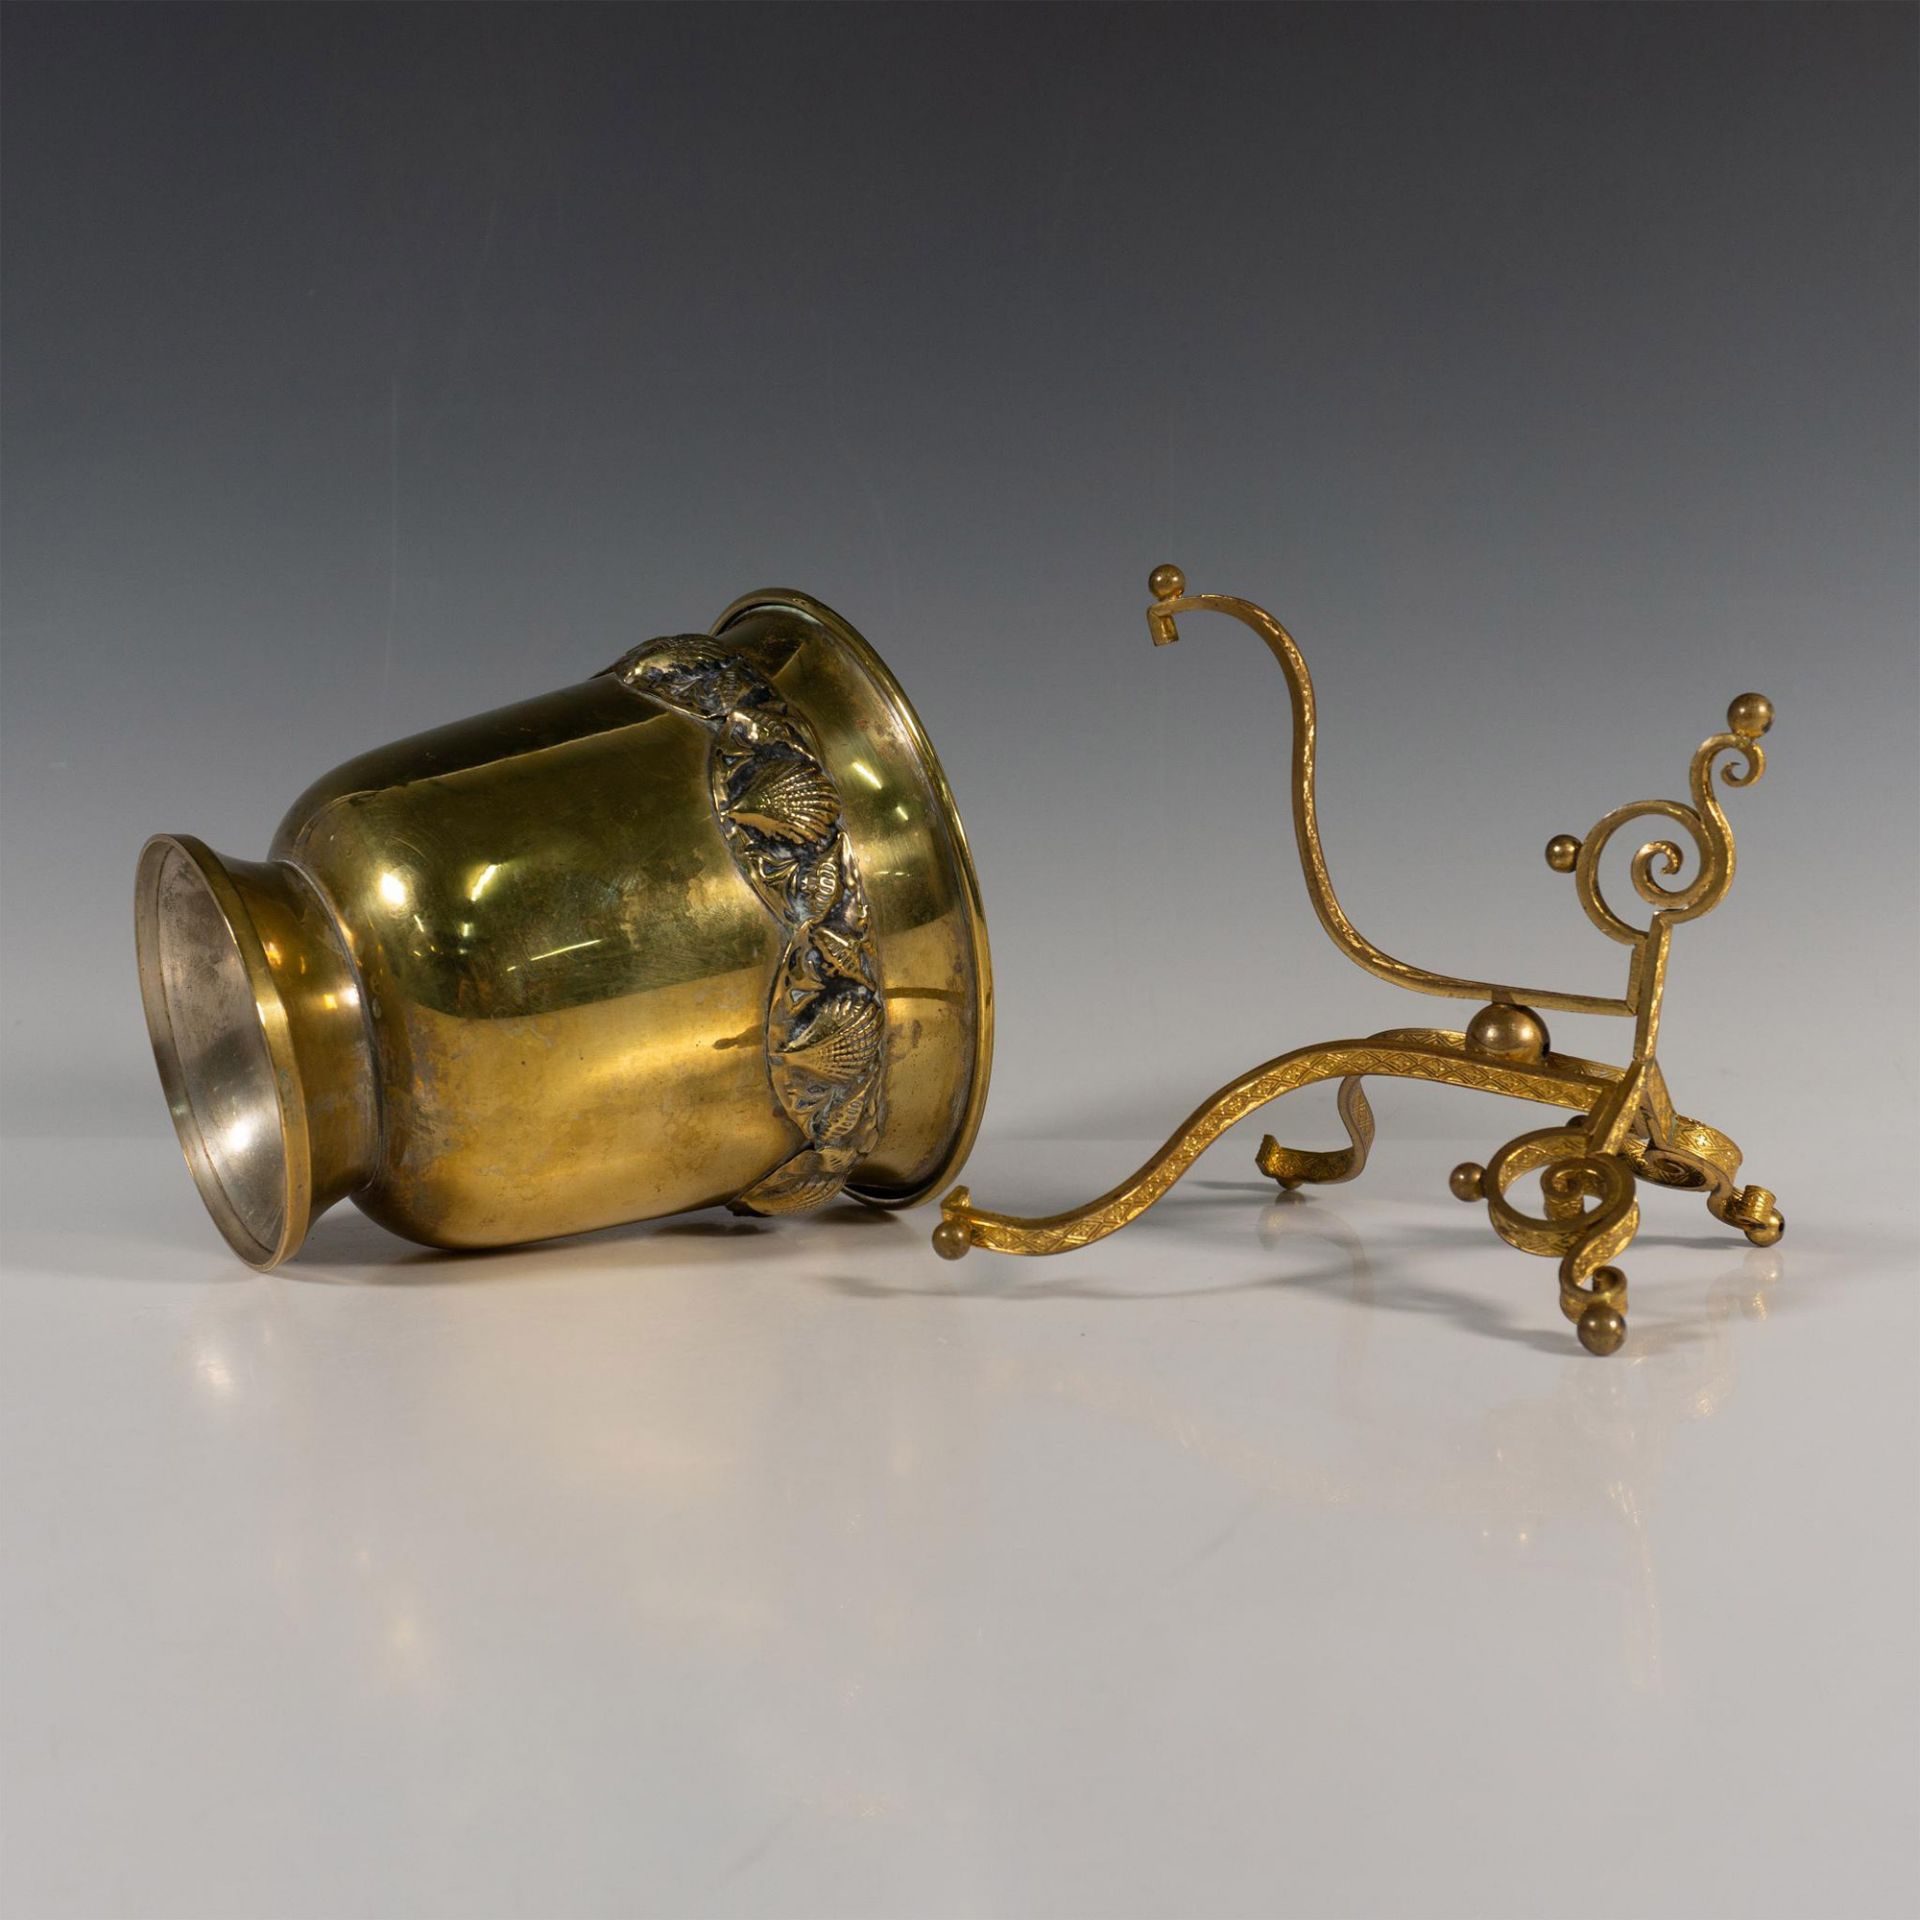 Decorative Brass Bowl with Marine Designs & Candle Holder - Image 2 of 5